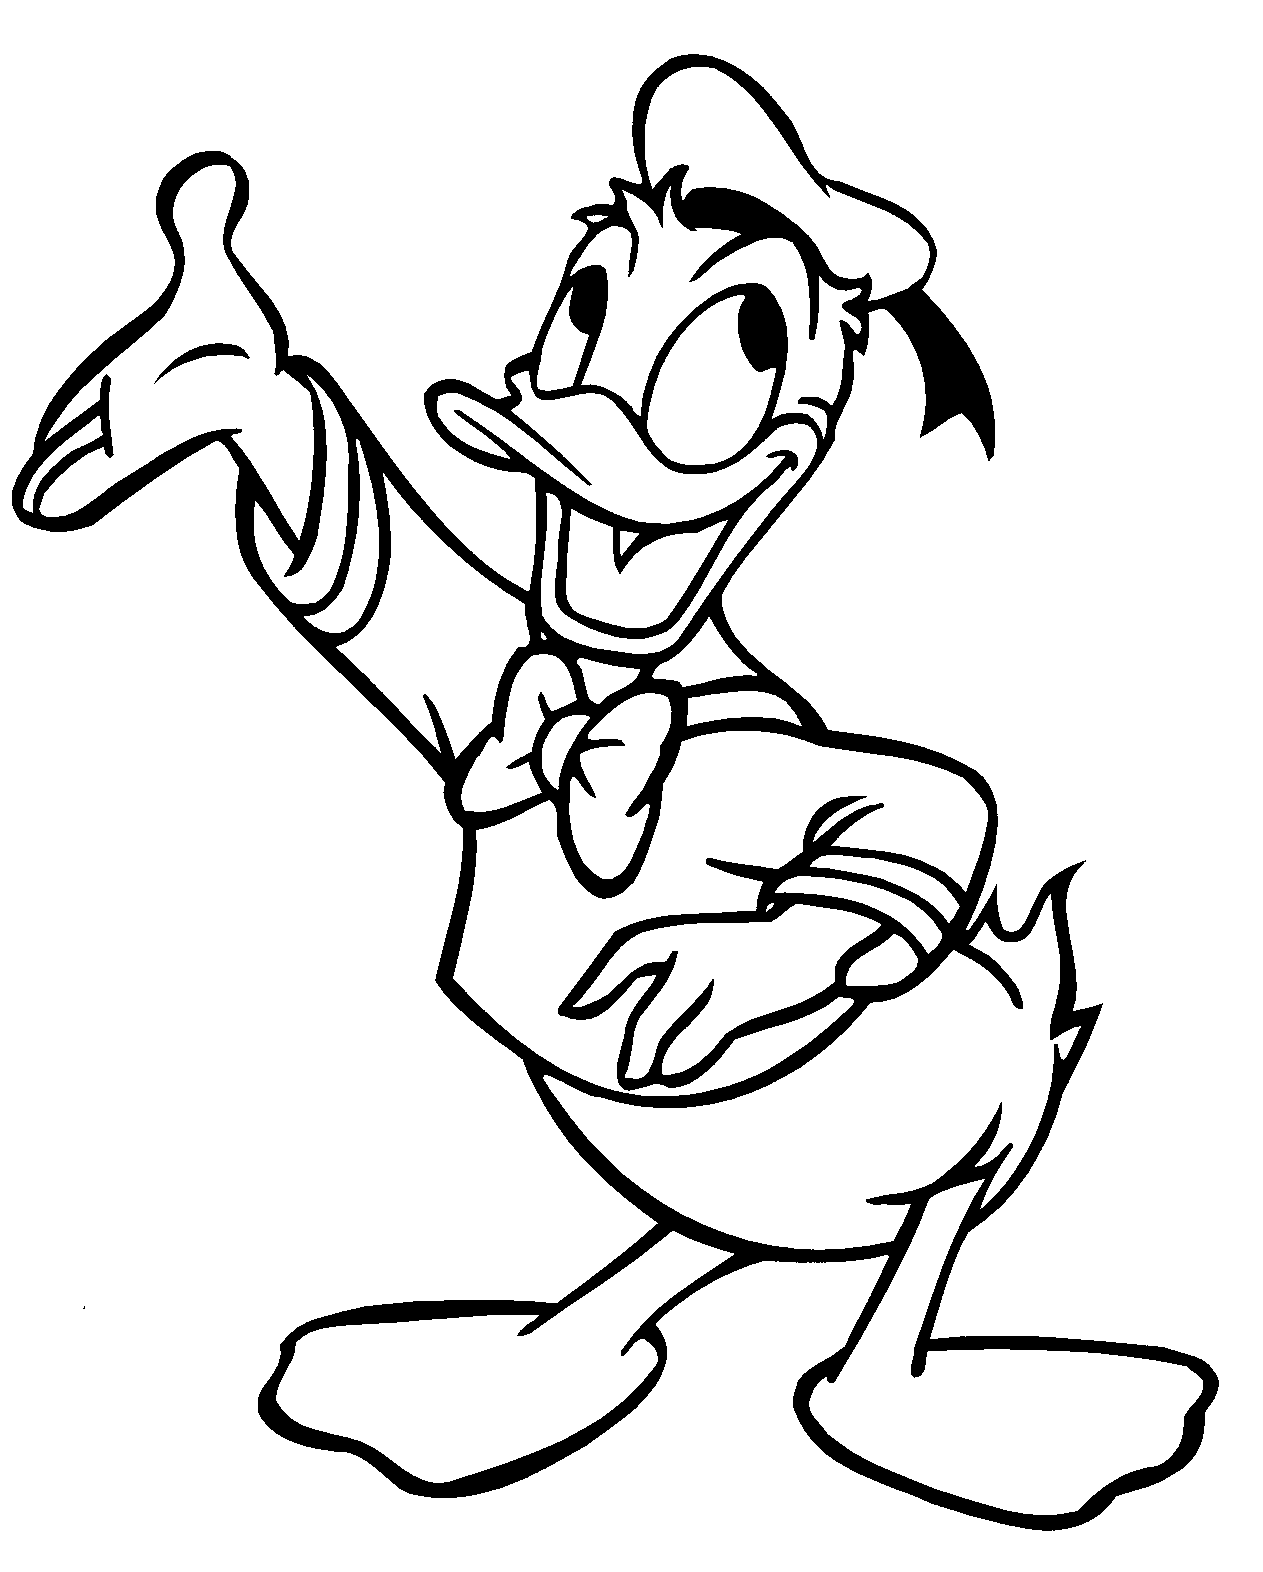 duck coloring sheet free printable donald duck coloring pages for kids duck sheet coloring 